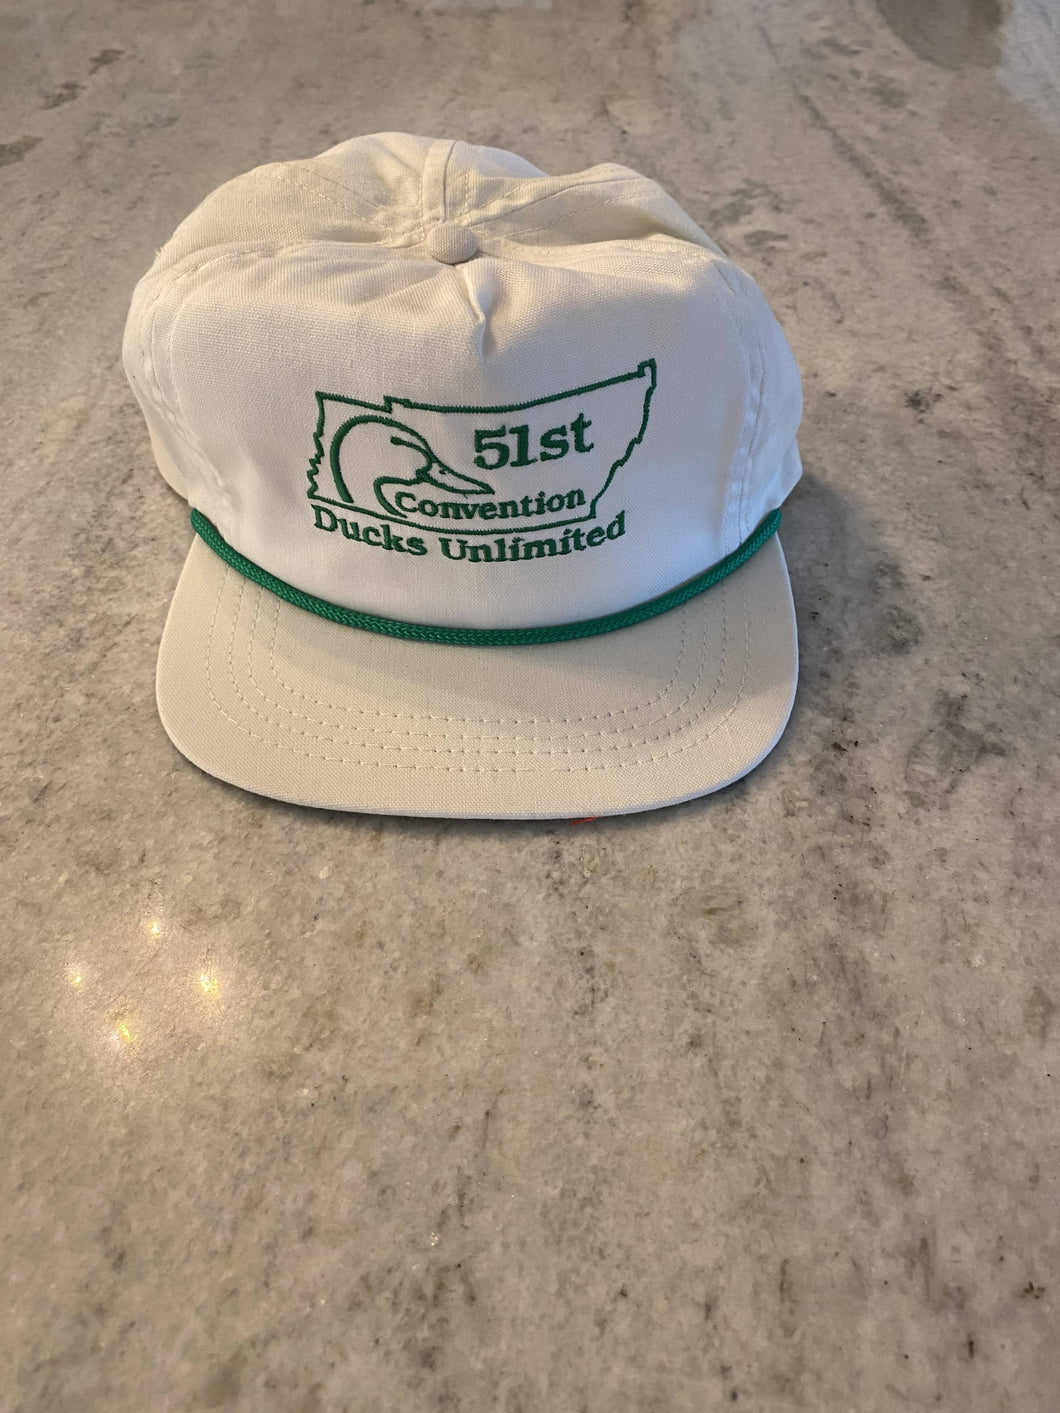 51st Convention Ducks Unlimited Hat